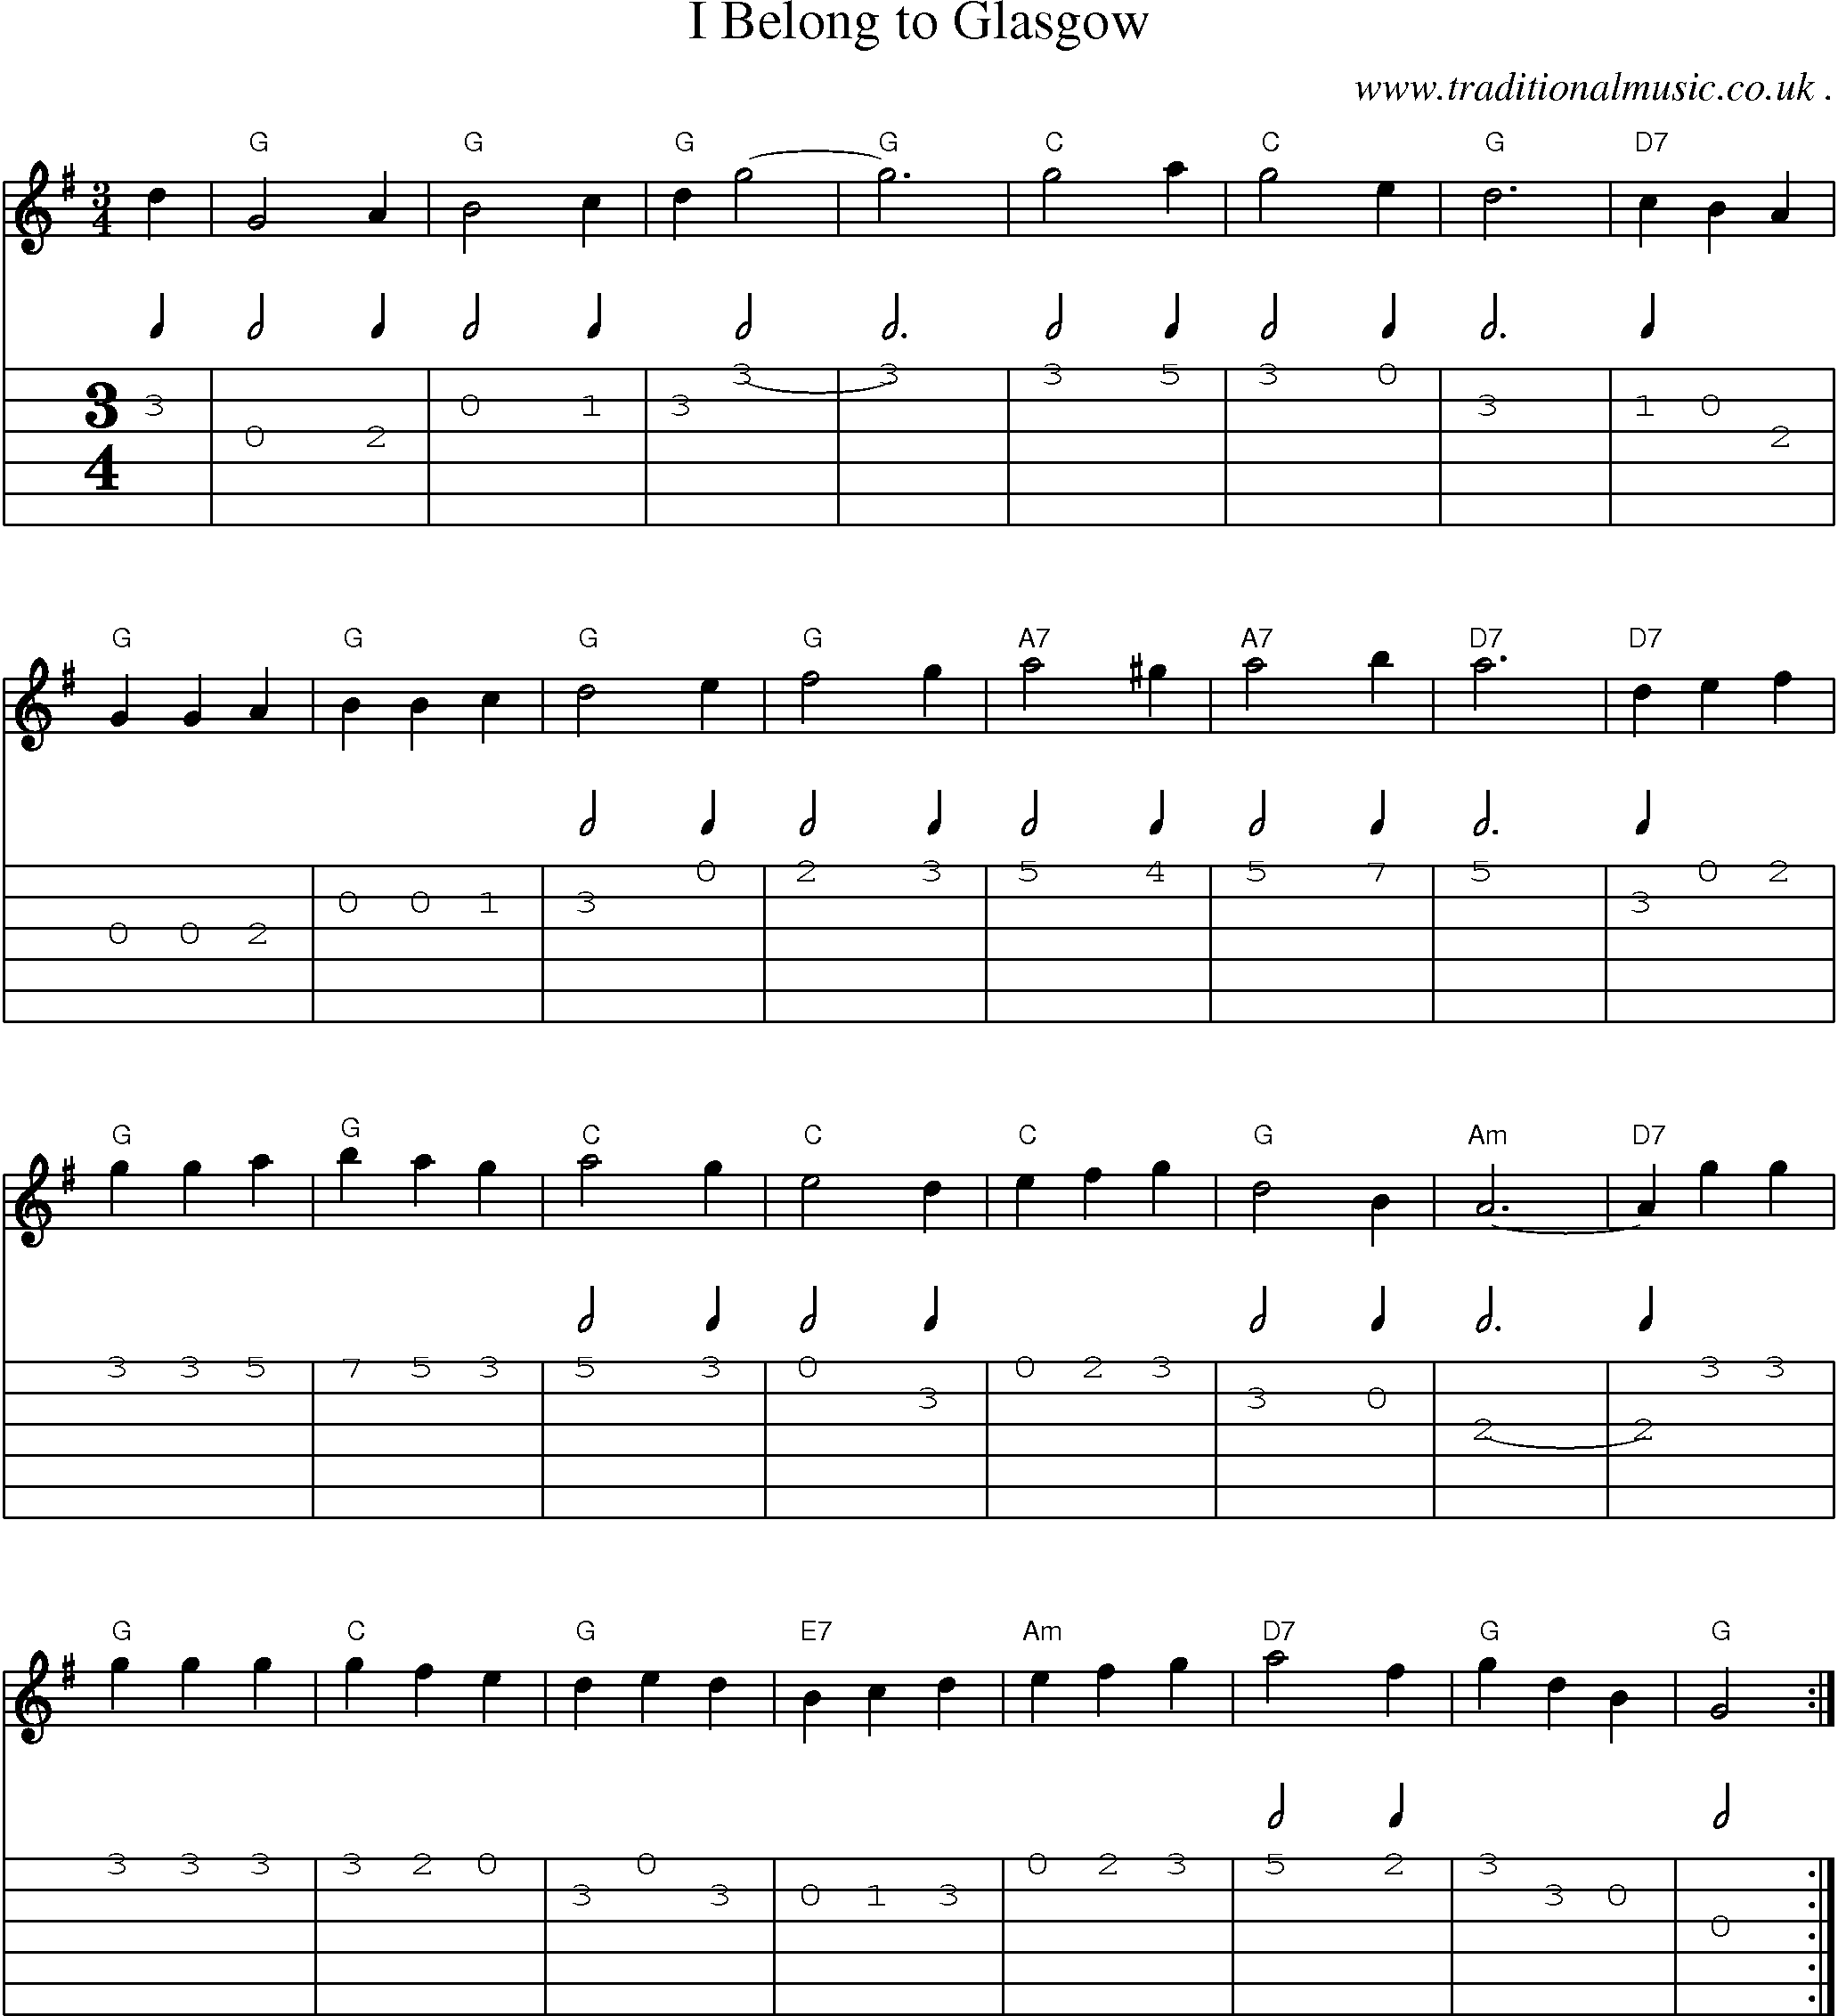 Sheet-music  score, Chords and Guitar Tabs for I Belong To Glasgow